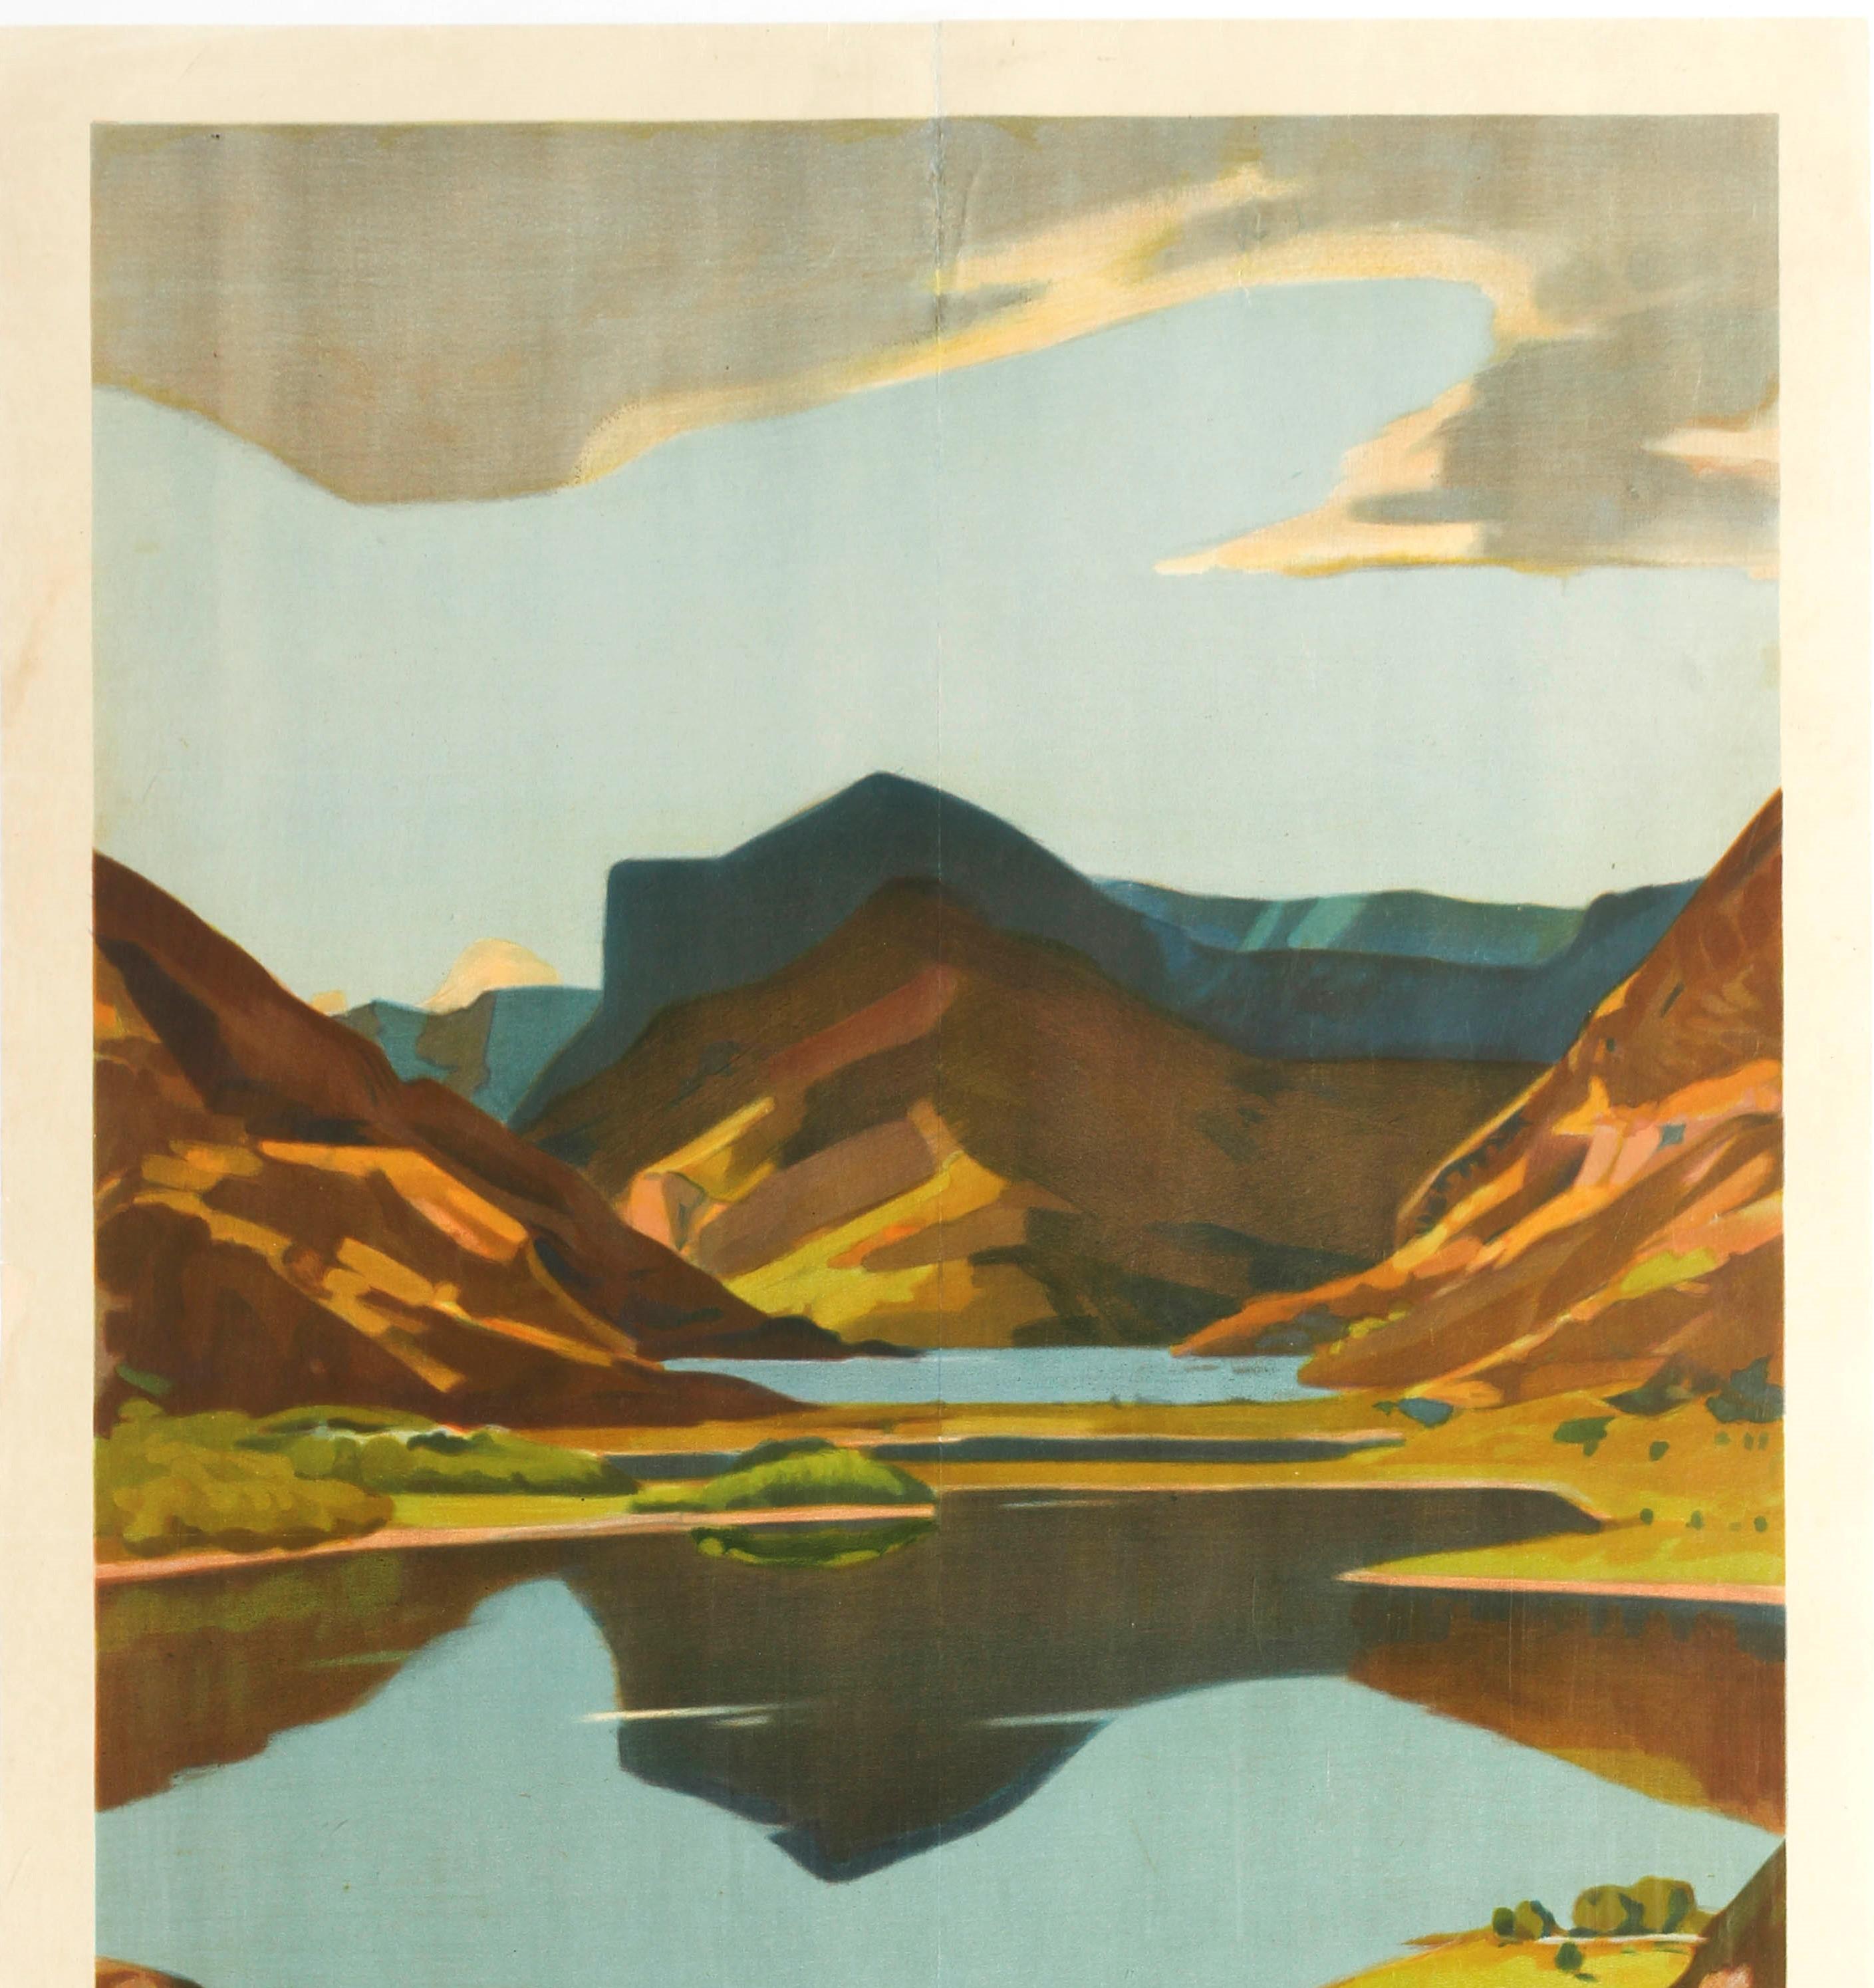 Original vintage travel poster published by the LMS London Midland & Scottish Railway company to promote The Lake District featuring a painting by the British Impressionist artist Algernon Talmage (1871-1939) depicting a scenic view of Honister Crag